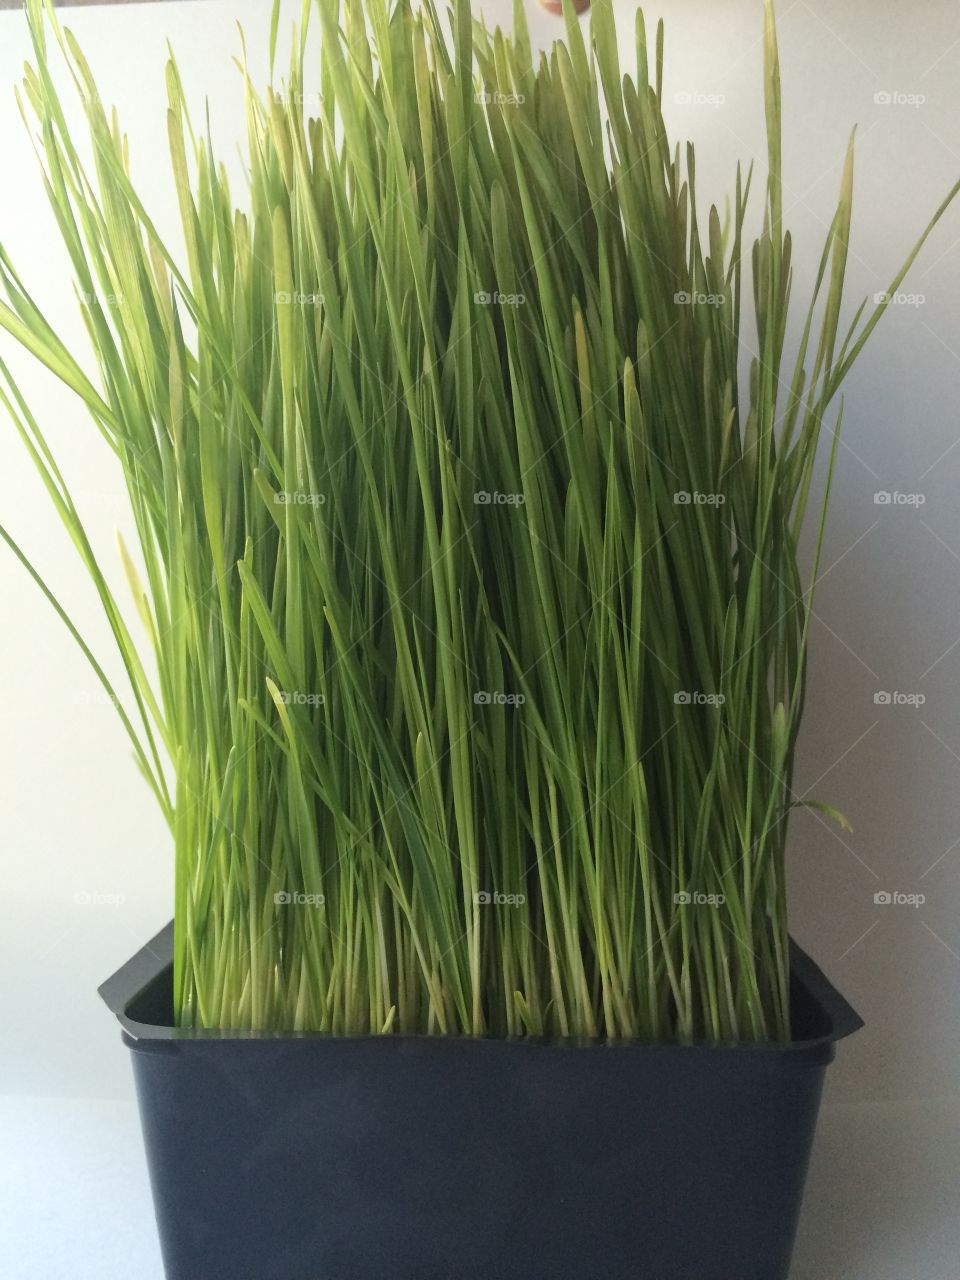 Wheat grass. A growing tray of wheat grass